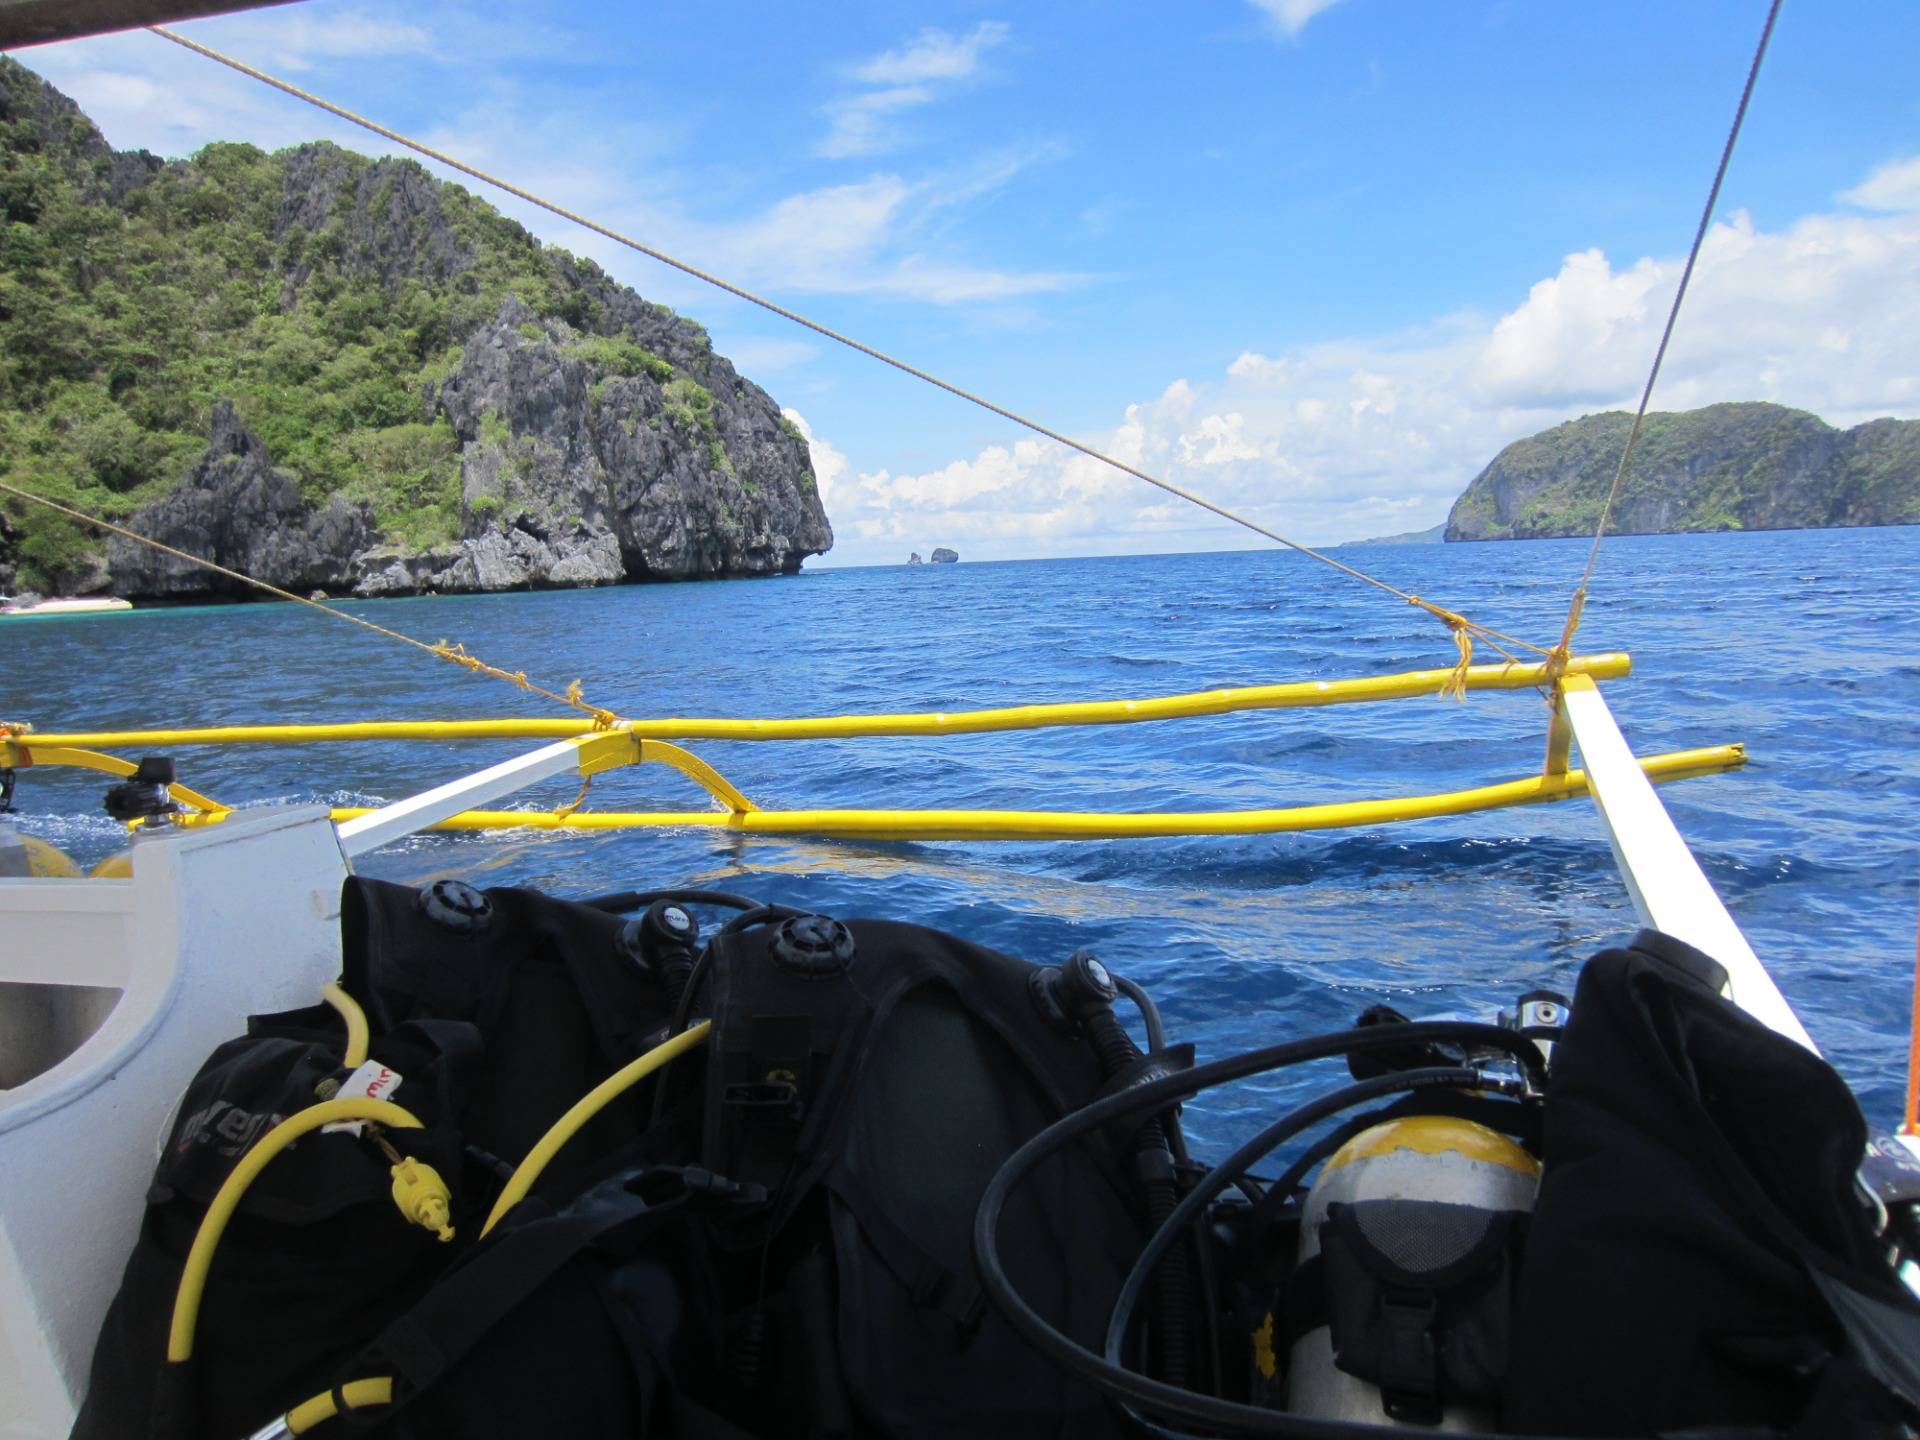 The gear ready for wetness. The dive site, close in sight.